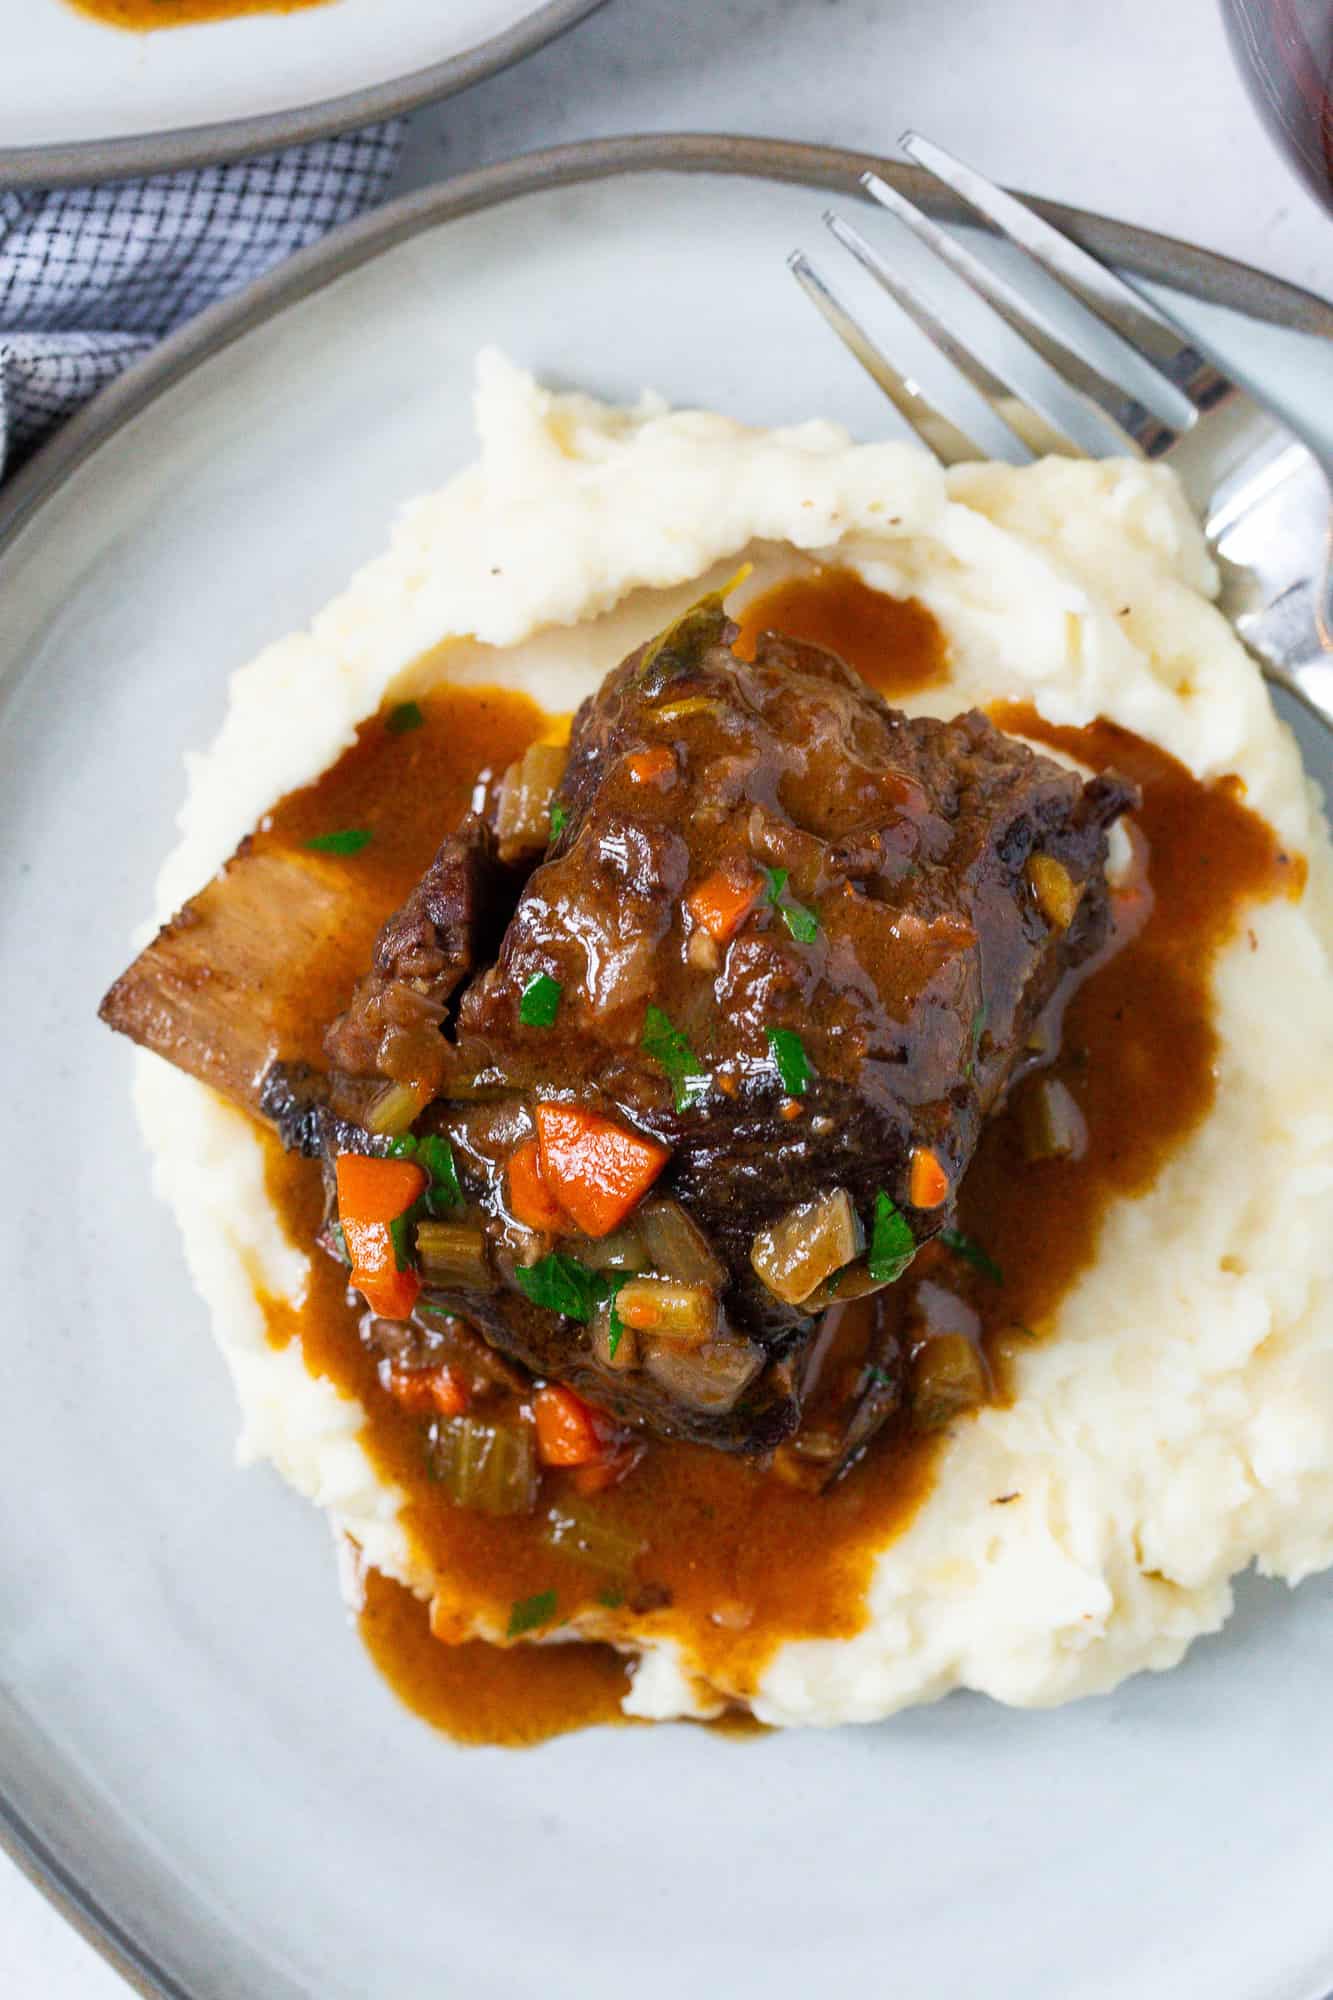 Overhead view of braised short rib on top of mashed potatoes.